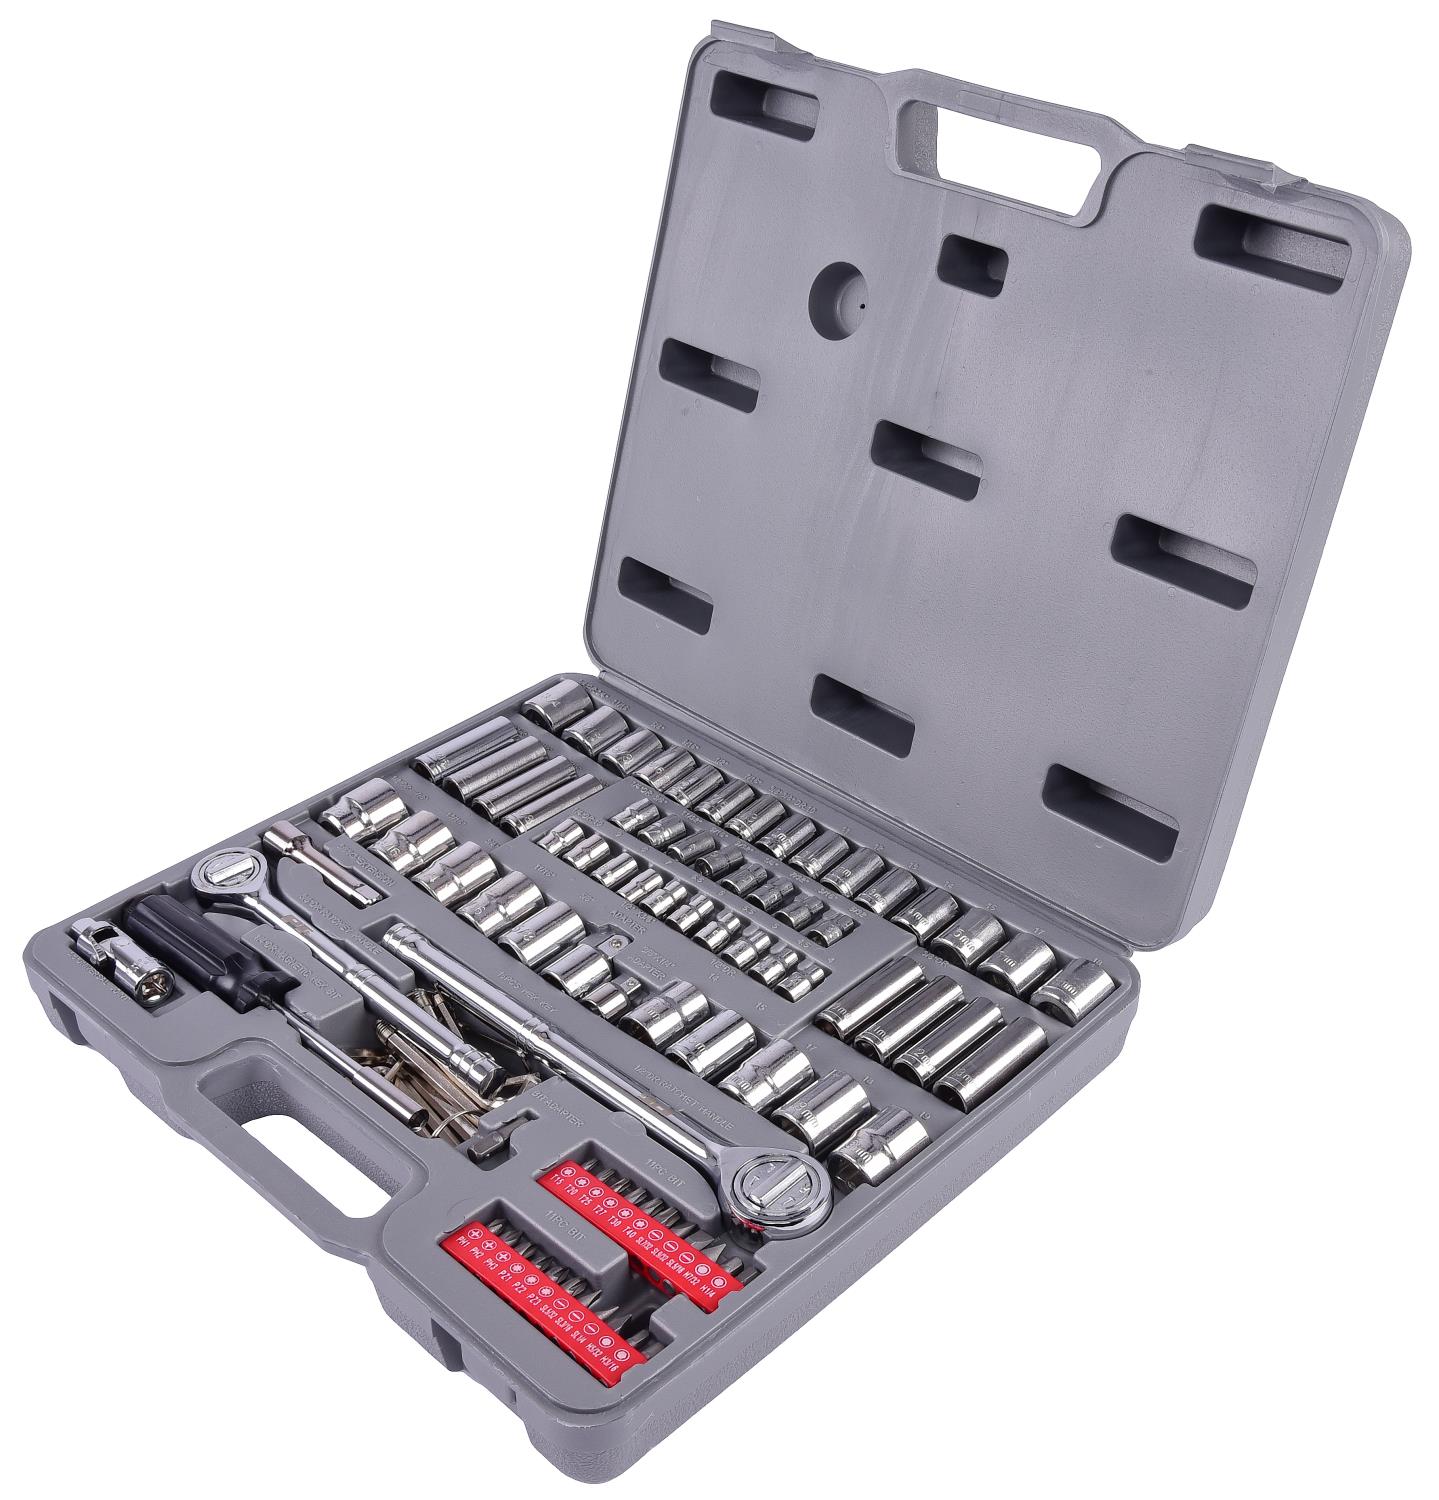 JEGS W1198: 100-Piece Socket  Bit Set with Carry Case Includes: (2)  Ratchets, (1) Extension, (1) U-Joint, (2) Adapters, (18) 1/4 in. Sockets,  (15) 3/8 in. Sockets, (10) 1/2 in. Sockets, (22) Bits w/ Driver, (16) Hex  Keys JEGS